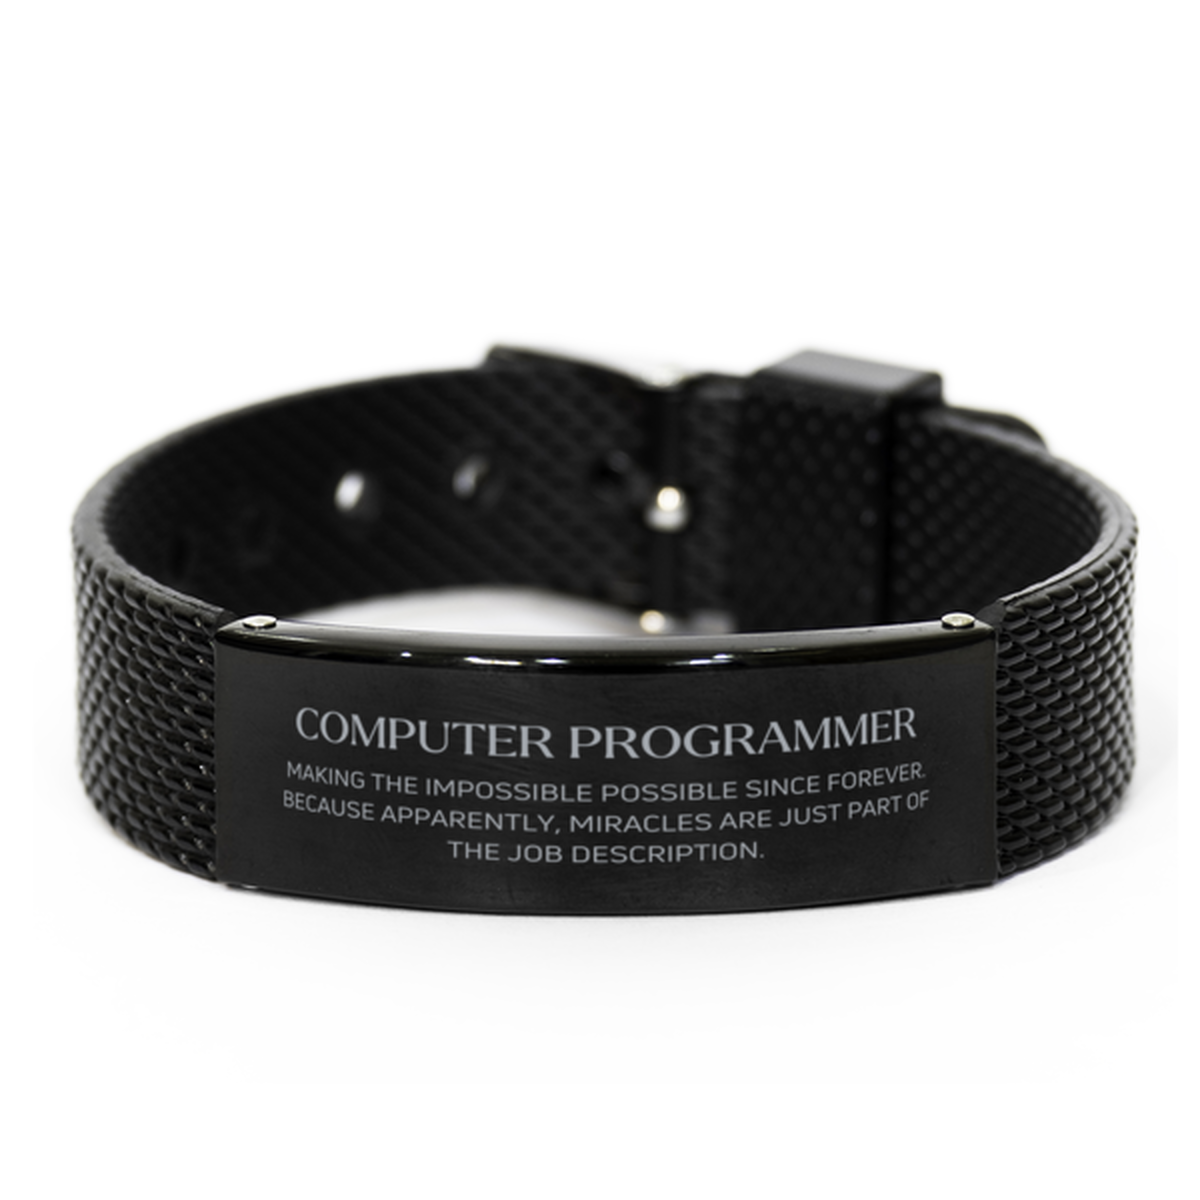 Funny Computer Programmer Gifts, Miracles are just part of the job description, Inspirational Birthday Black Shark Mesh Bracelet For Computer Programmer, Men, Women, Coworkers, Friends, Boss